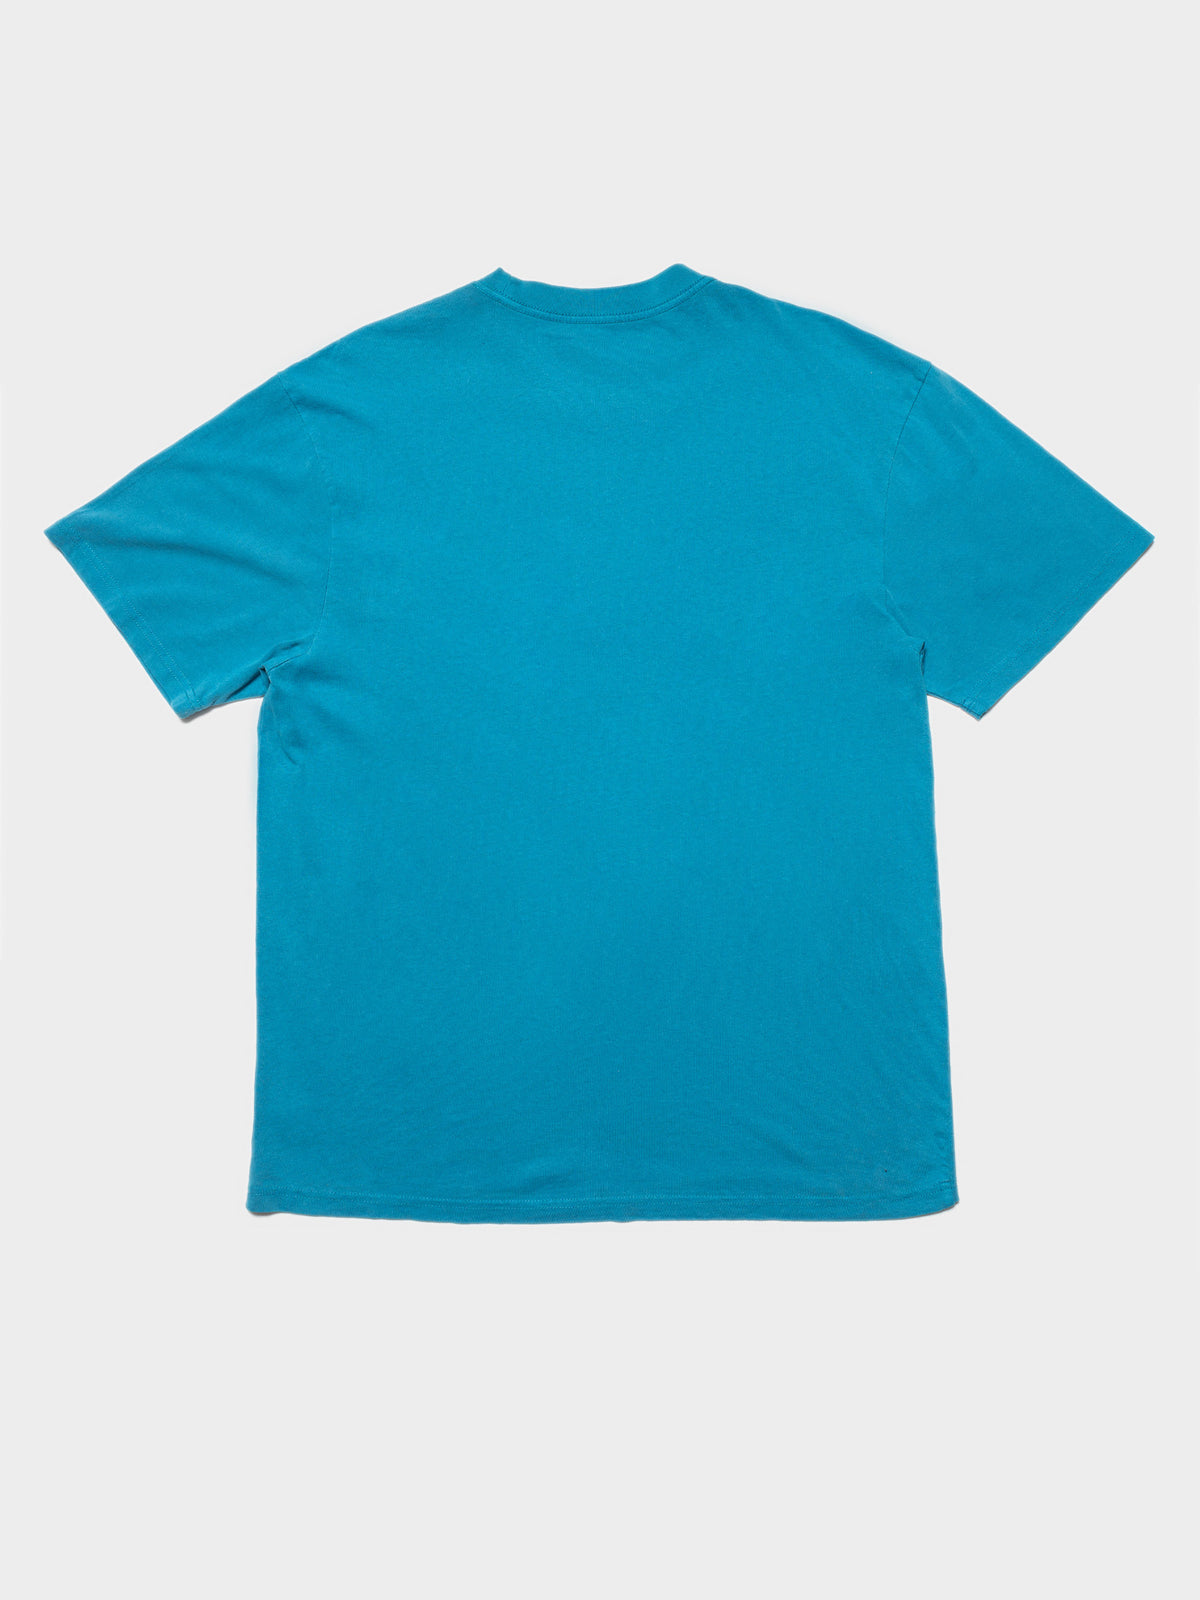 Vintage Miami Dolphins Superbowl T-Shirt in Teal